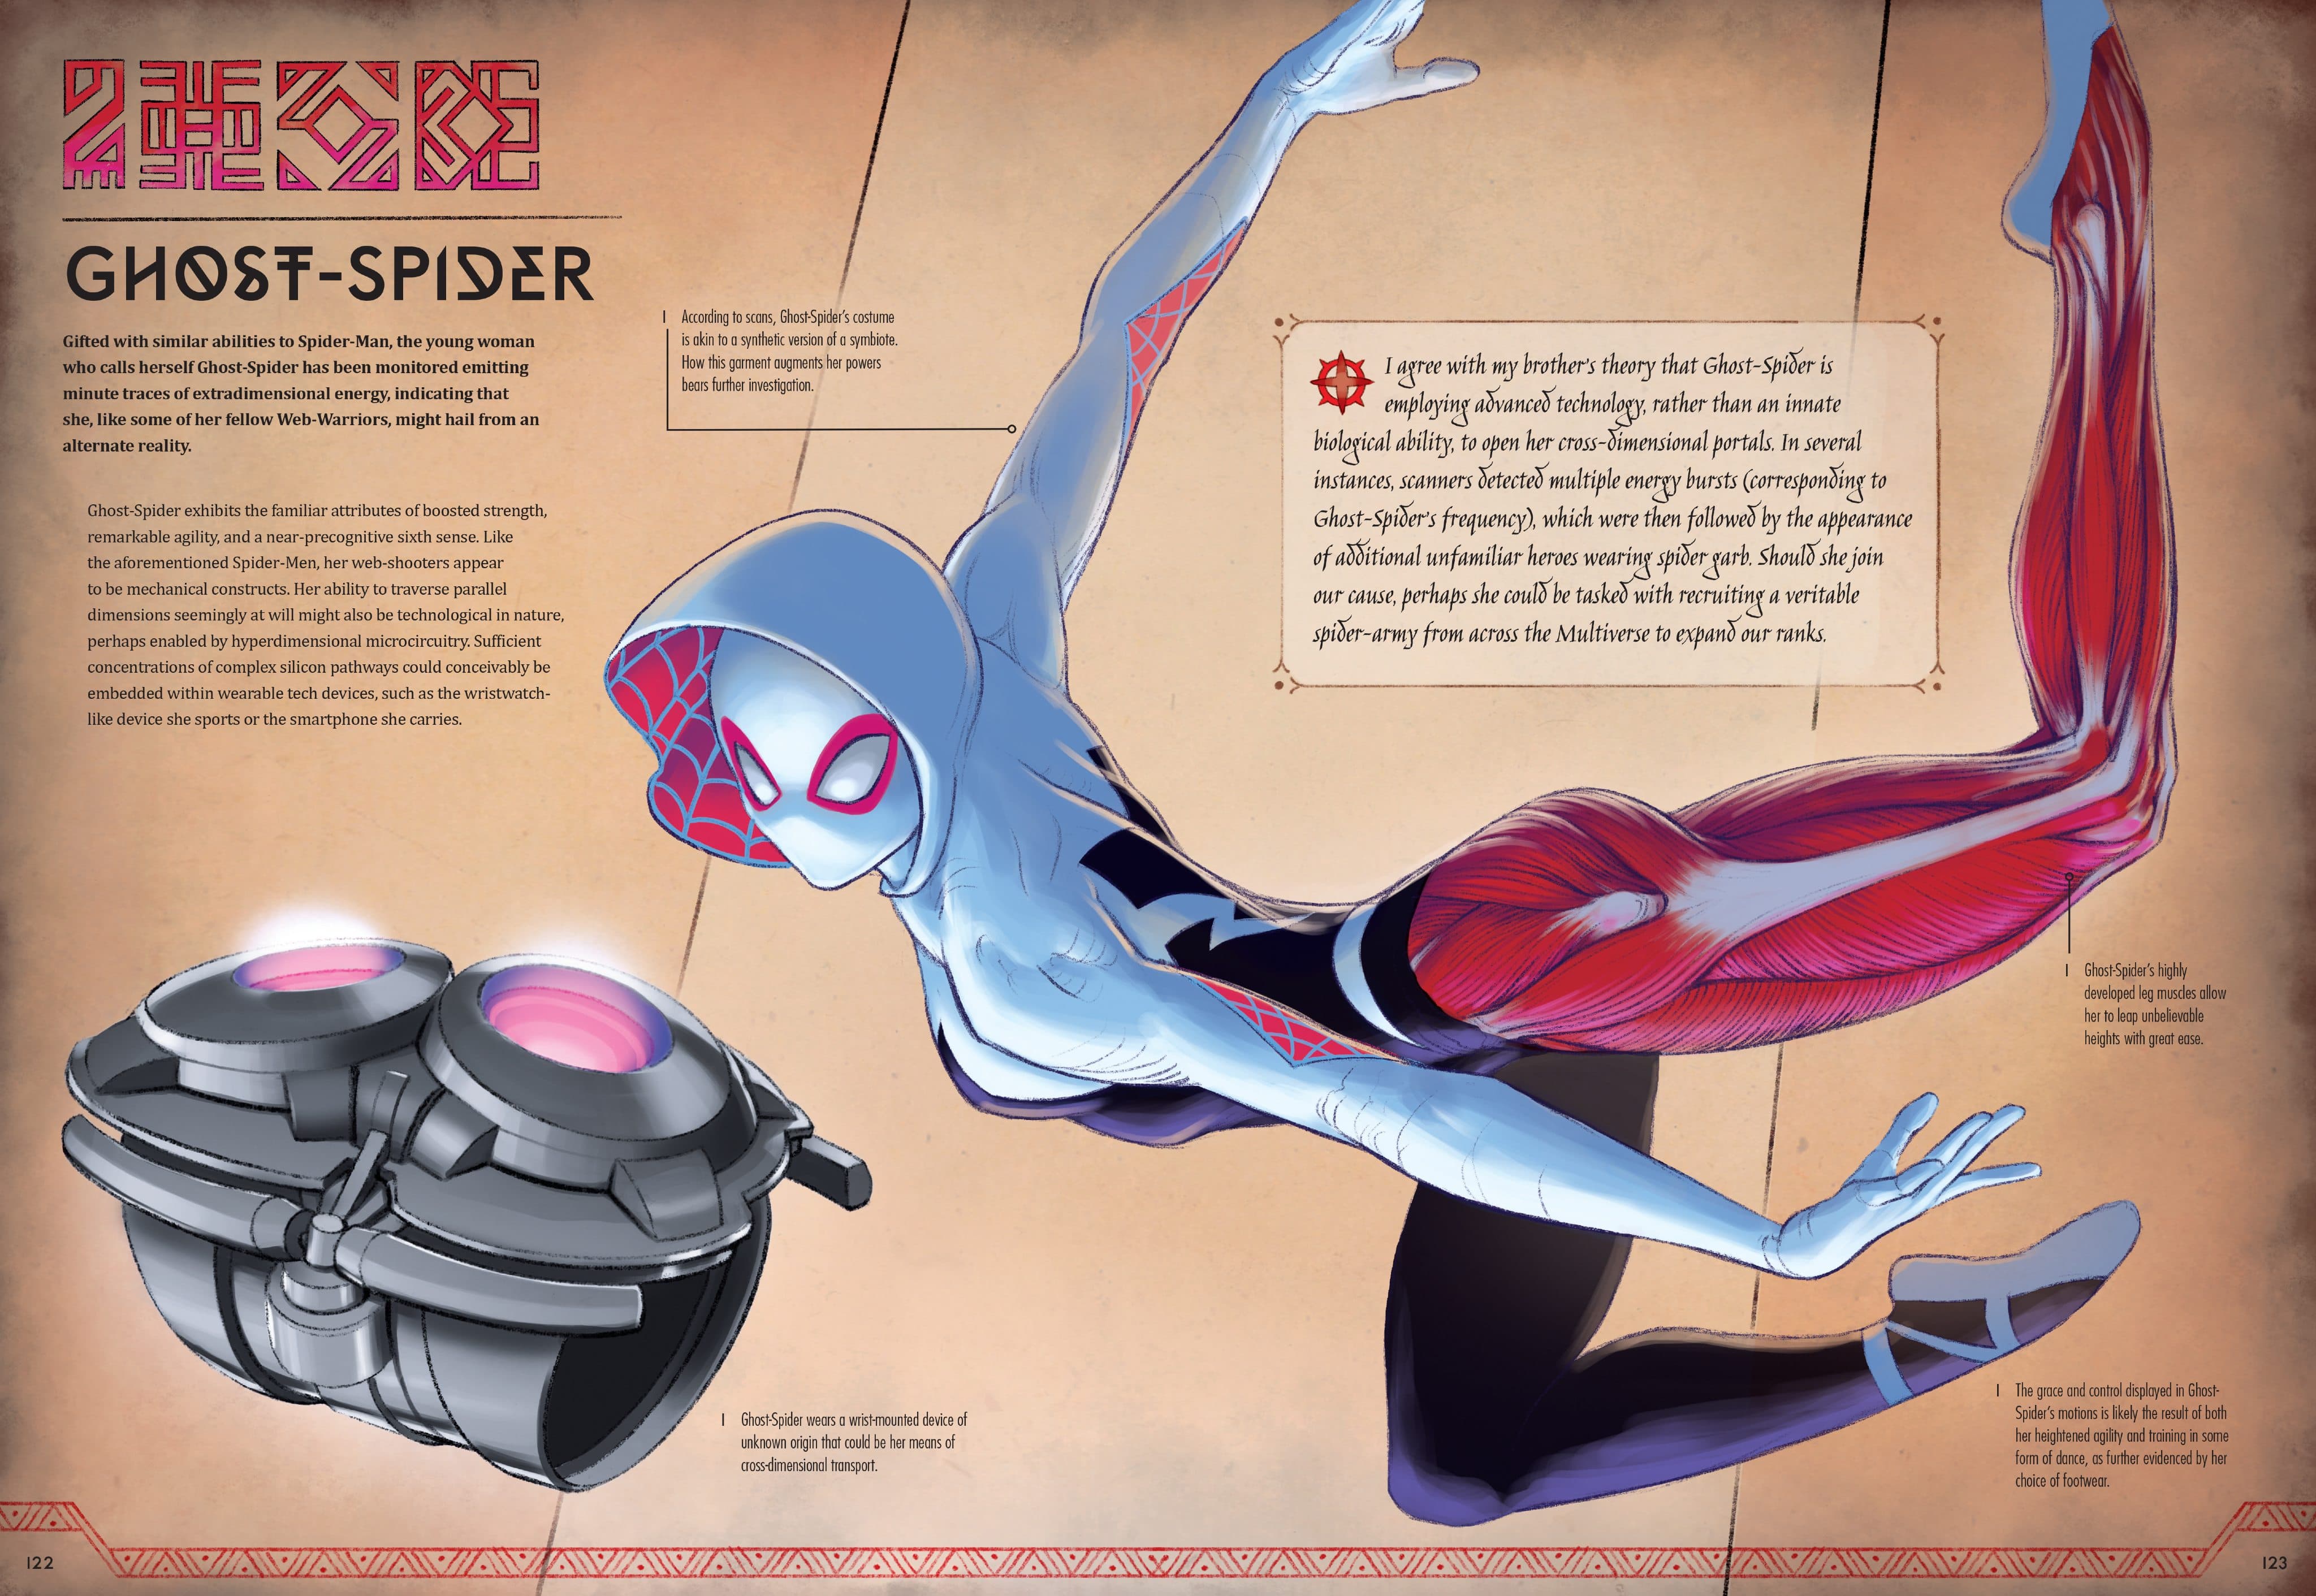 Ghost-Spider artwork by Jonah Lobe from 